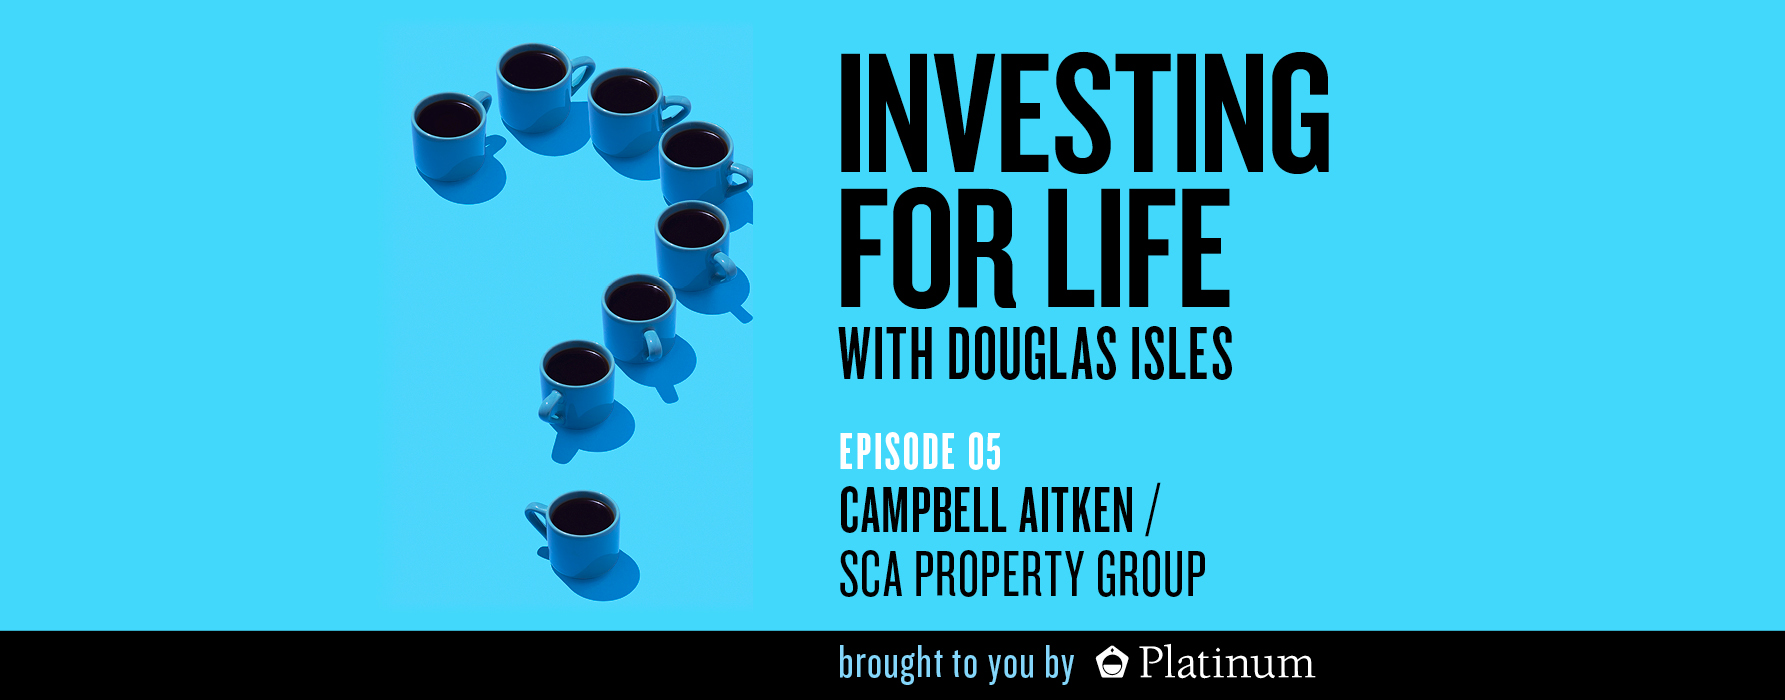 Investing for Life Podcast – Campbell Aitken, Chief Investment Officer, SCA Property Group